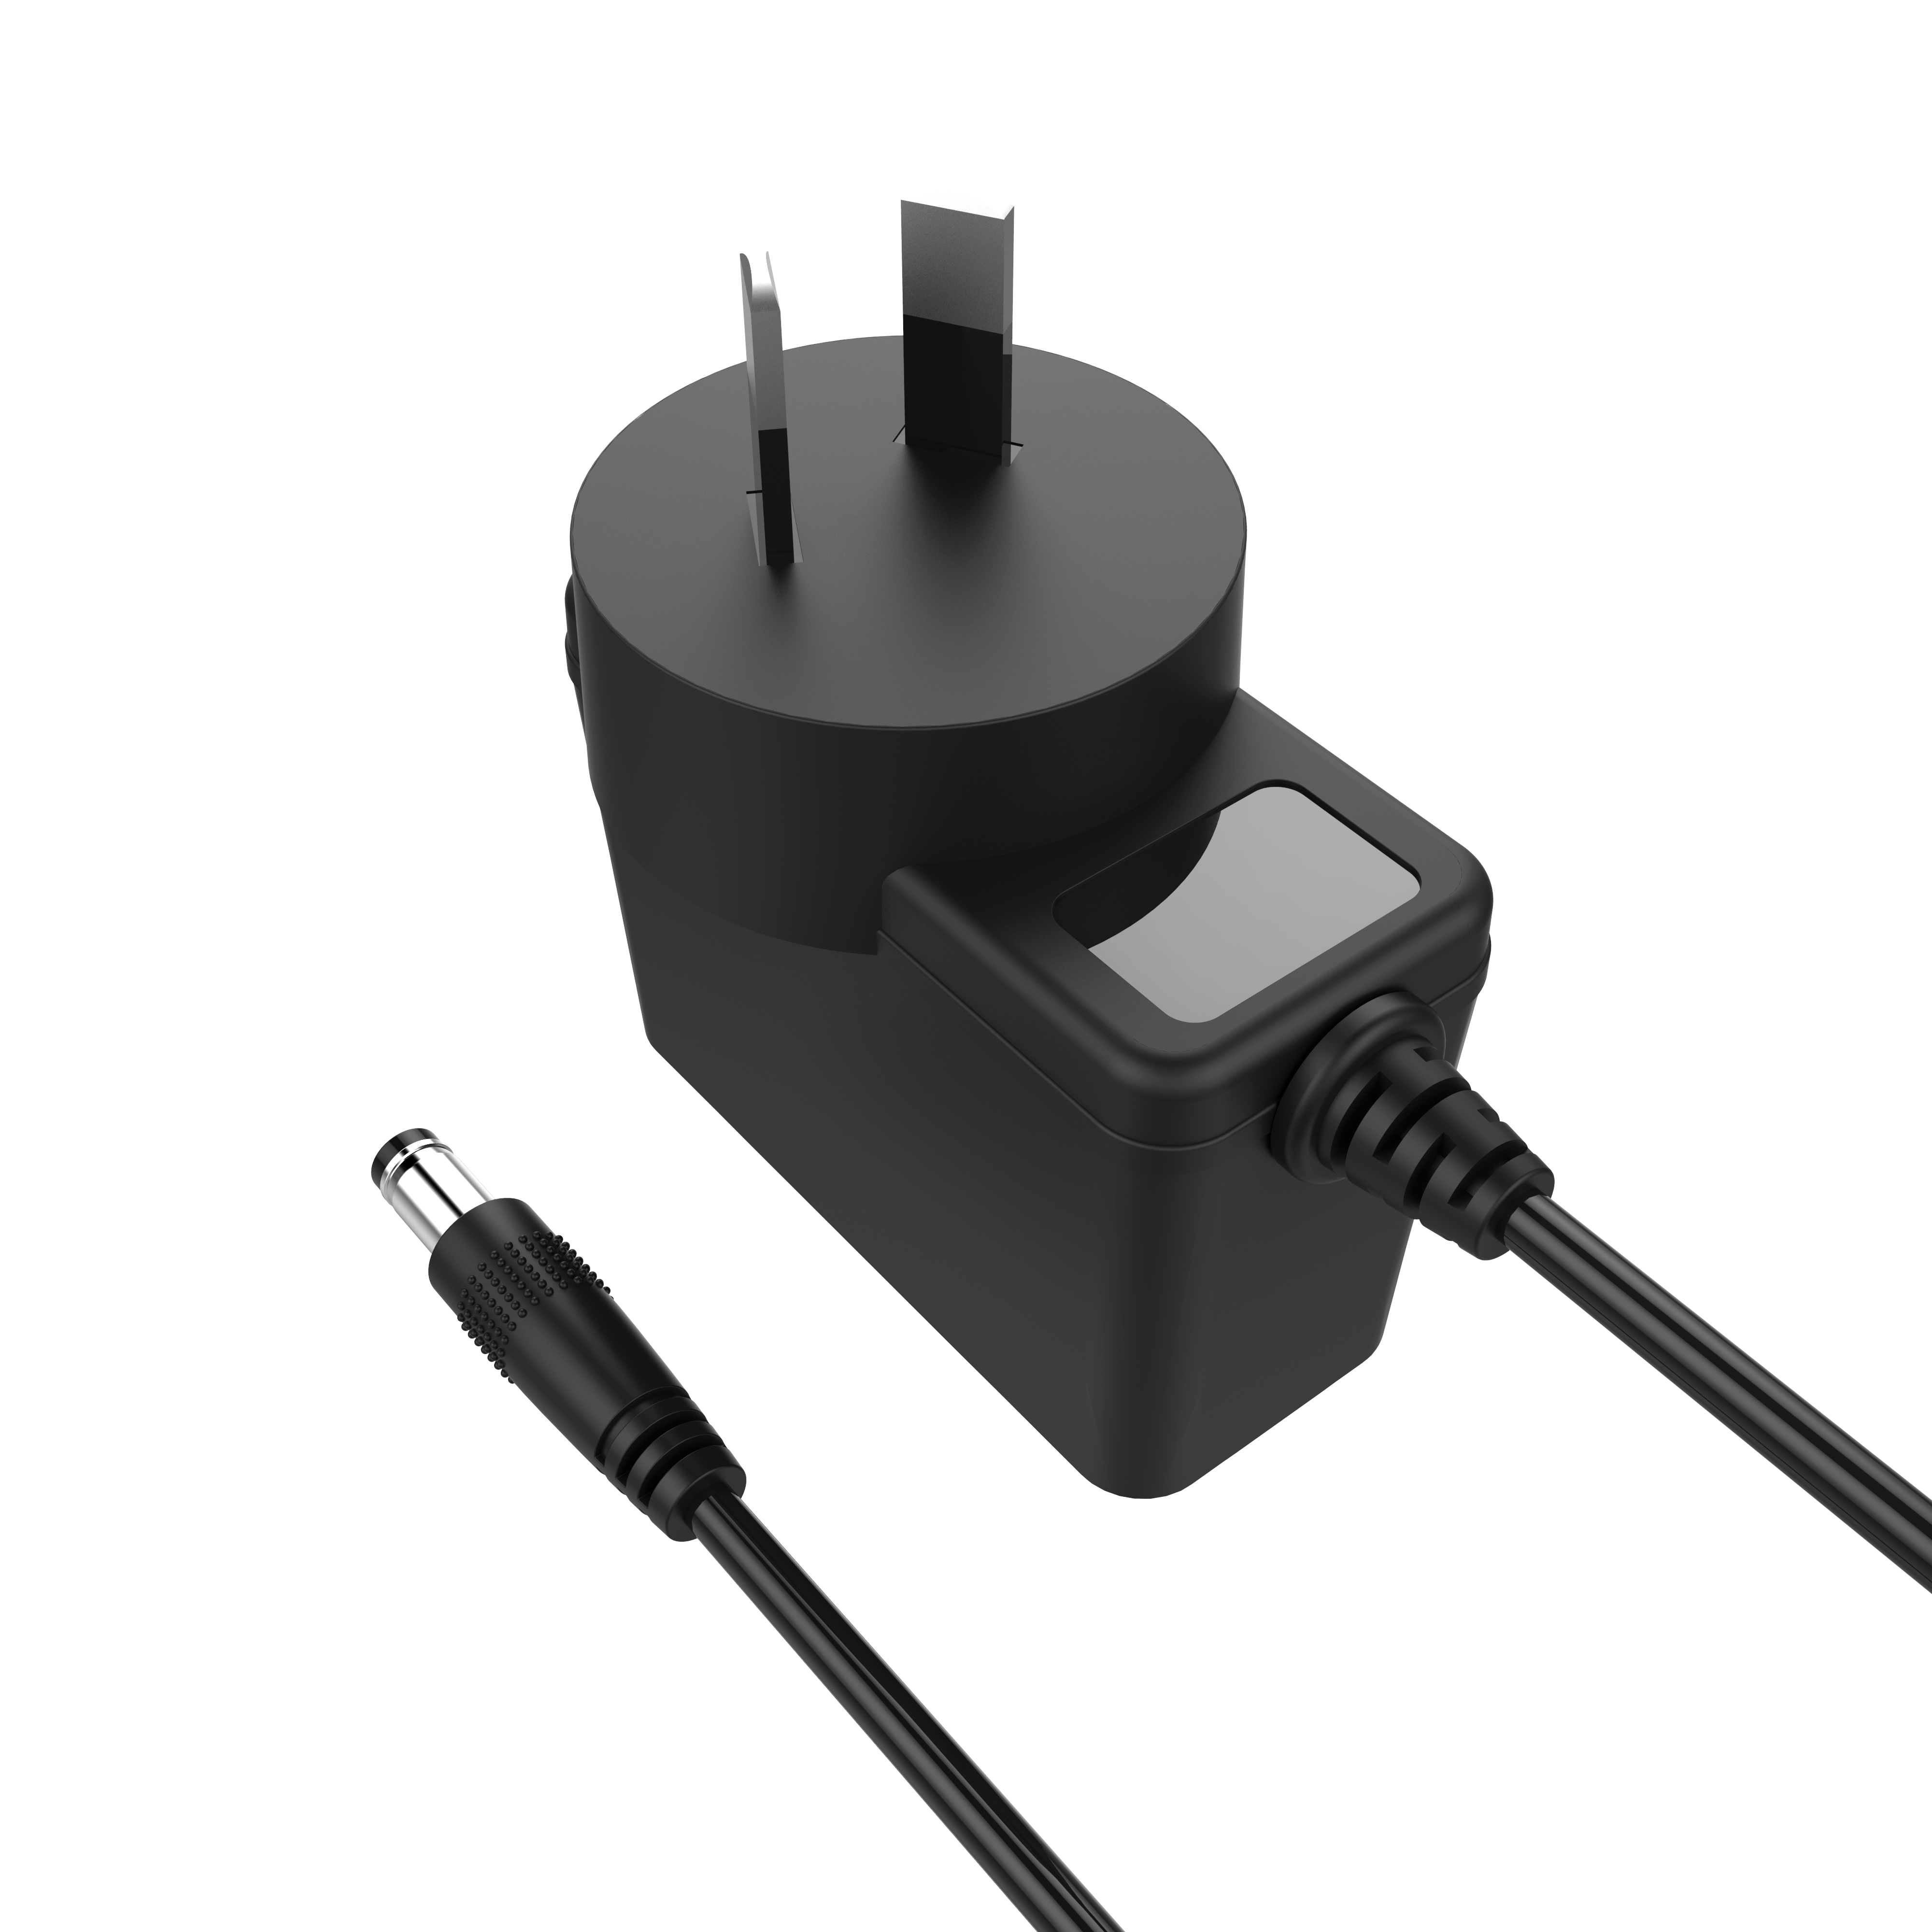 12W 5v2.1a 2a 12v1a Wall type Switching Power Adapter For Mobile Phone with UL62368, CB/CE/GS/EMC/LVD/SAA/KC/FCC/PSE/CCC safety